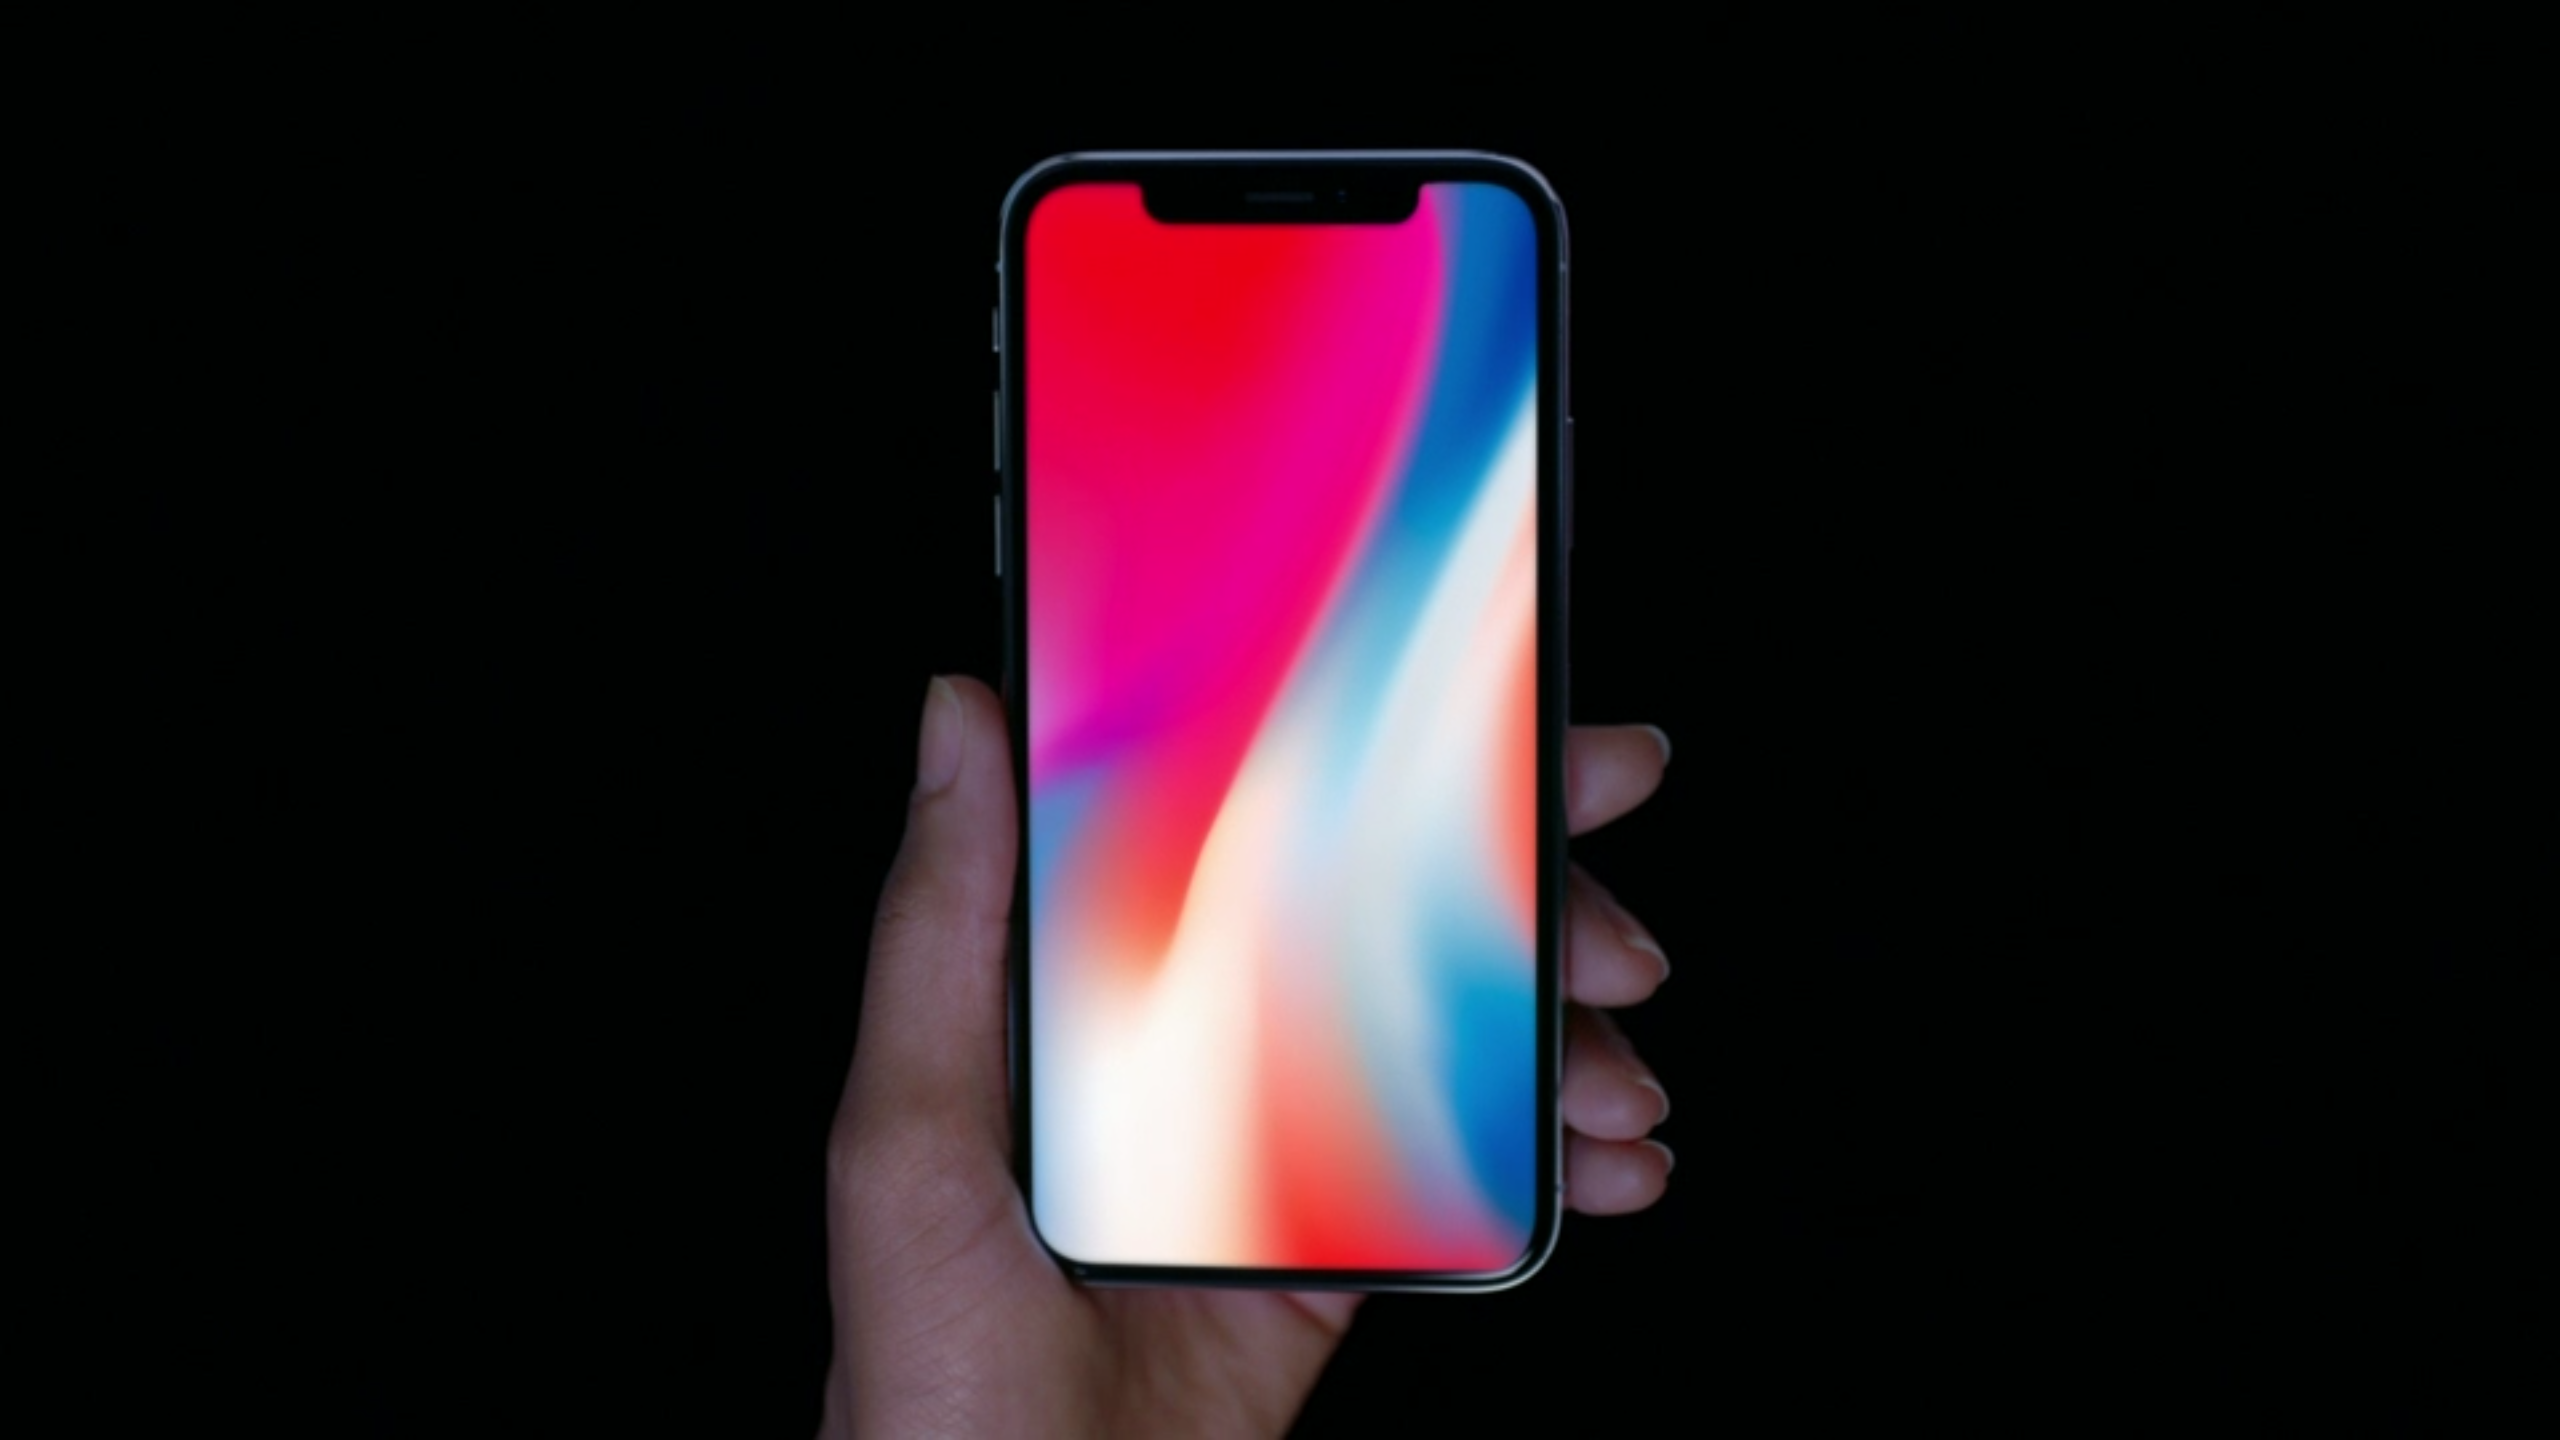 Apple unveils iPhone X with Super Retina Display and Face ID image 1